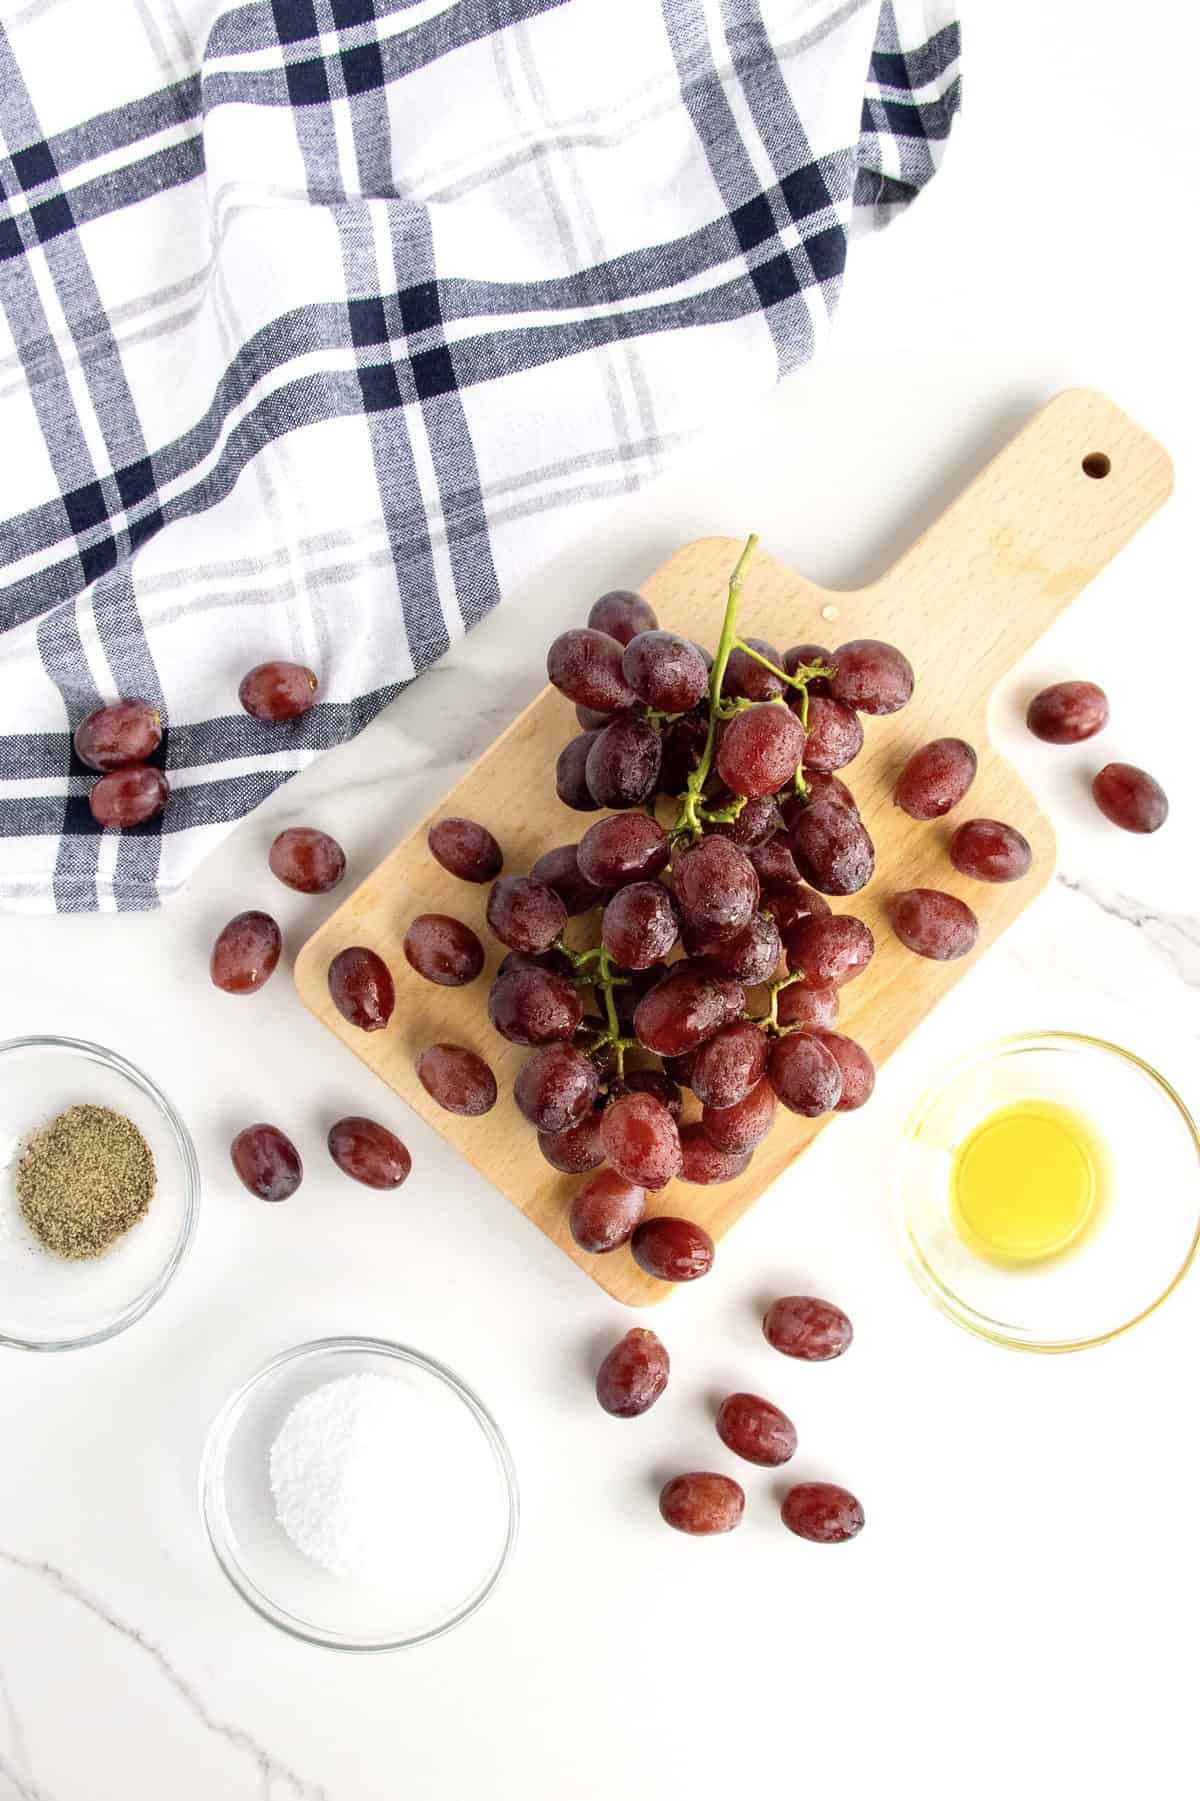 How to Roast Grapes by The BakerMama